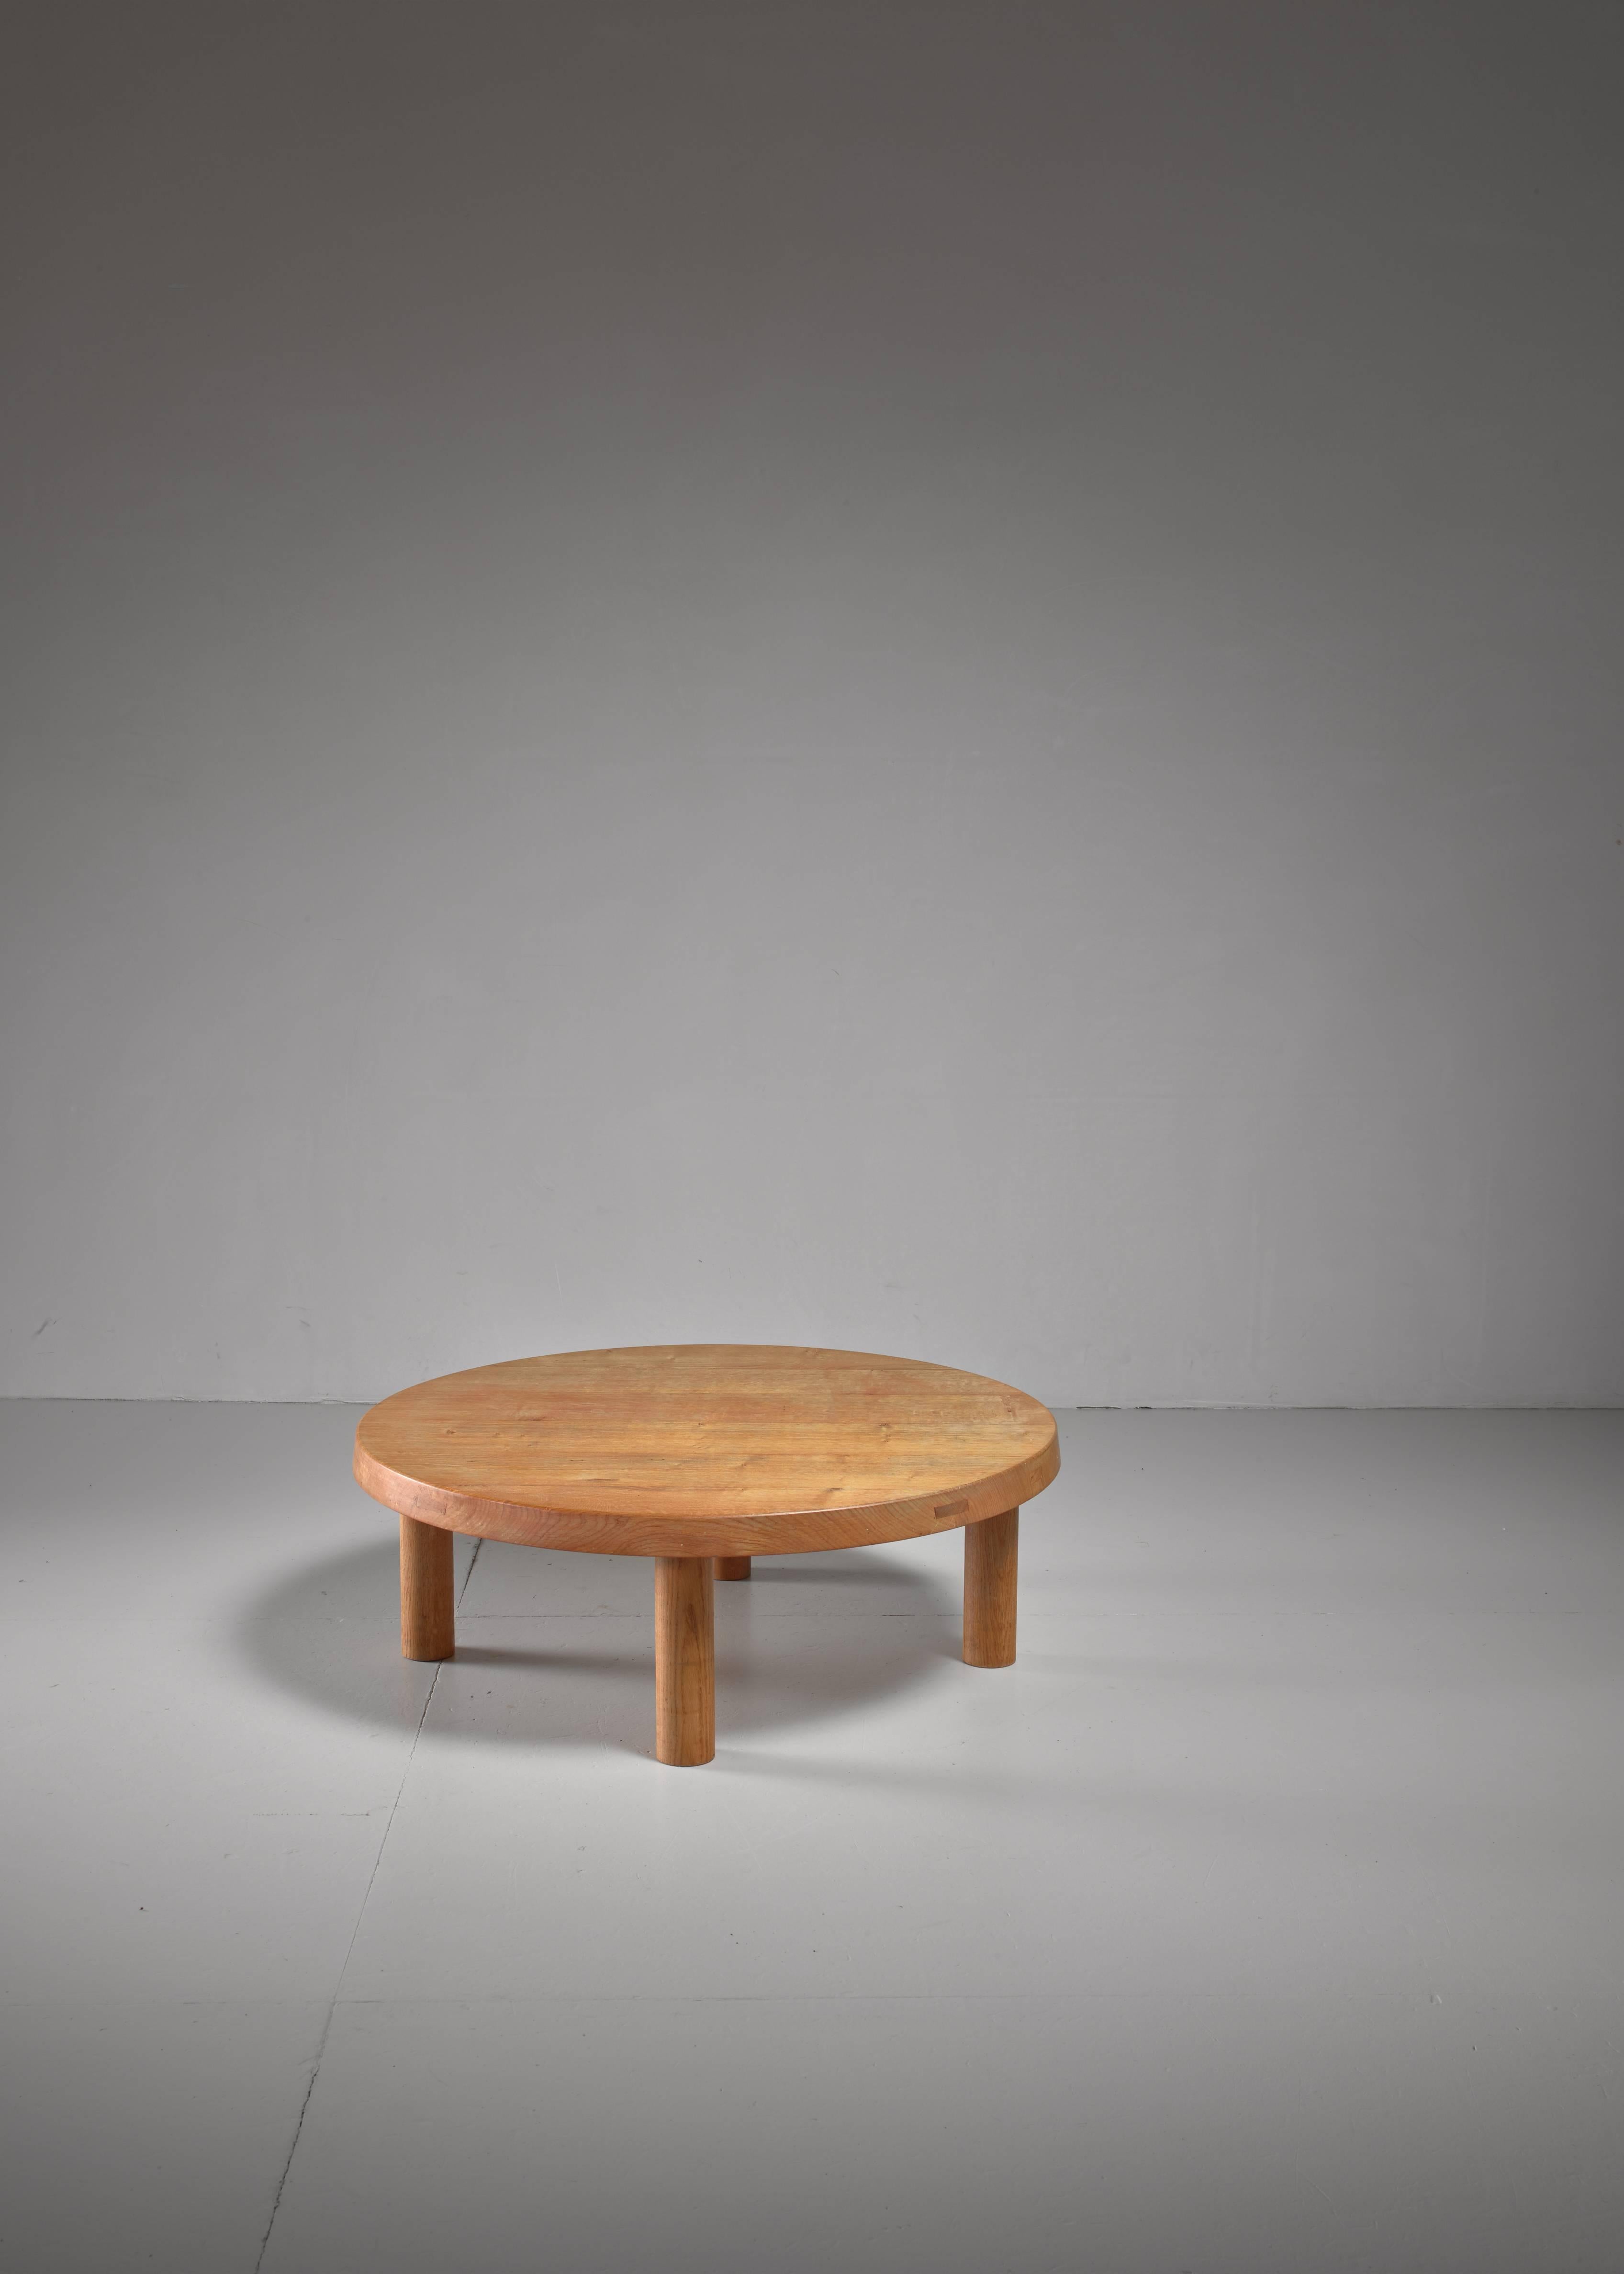 A large (94 cm diameter) coffee table by Pierre Chapo in solid oak. The table has a 5 cm thick top and is in perfect condition with beautiful markings in the wood itself.
 